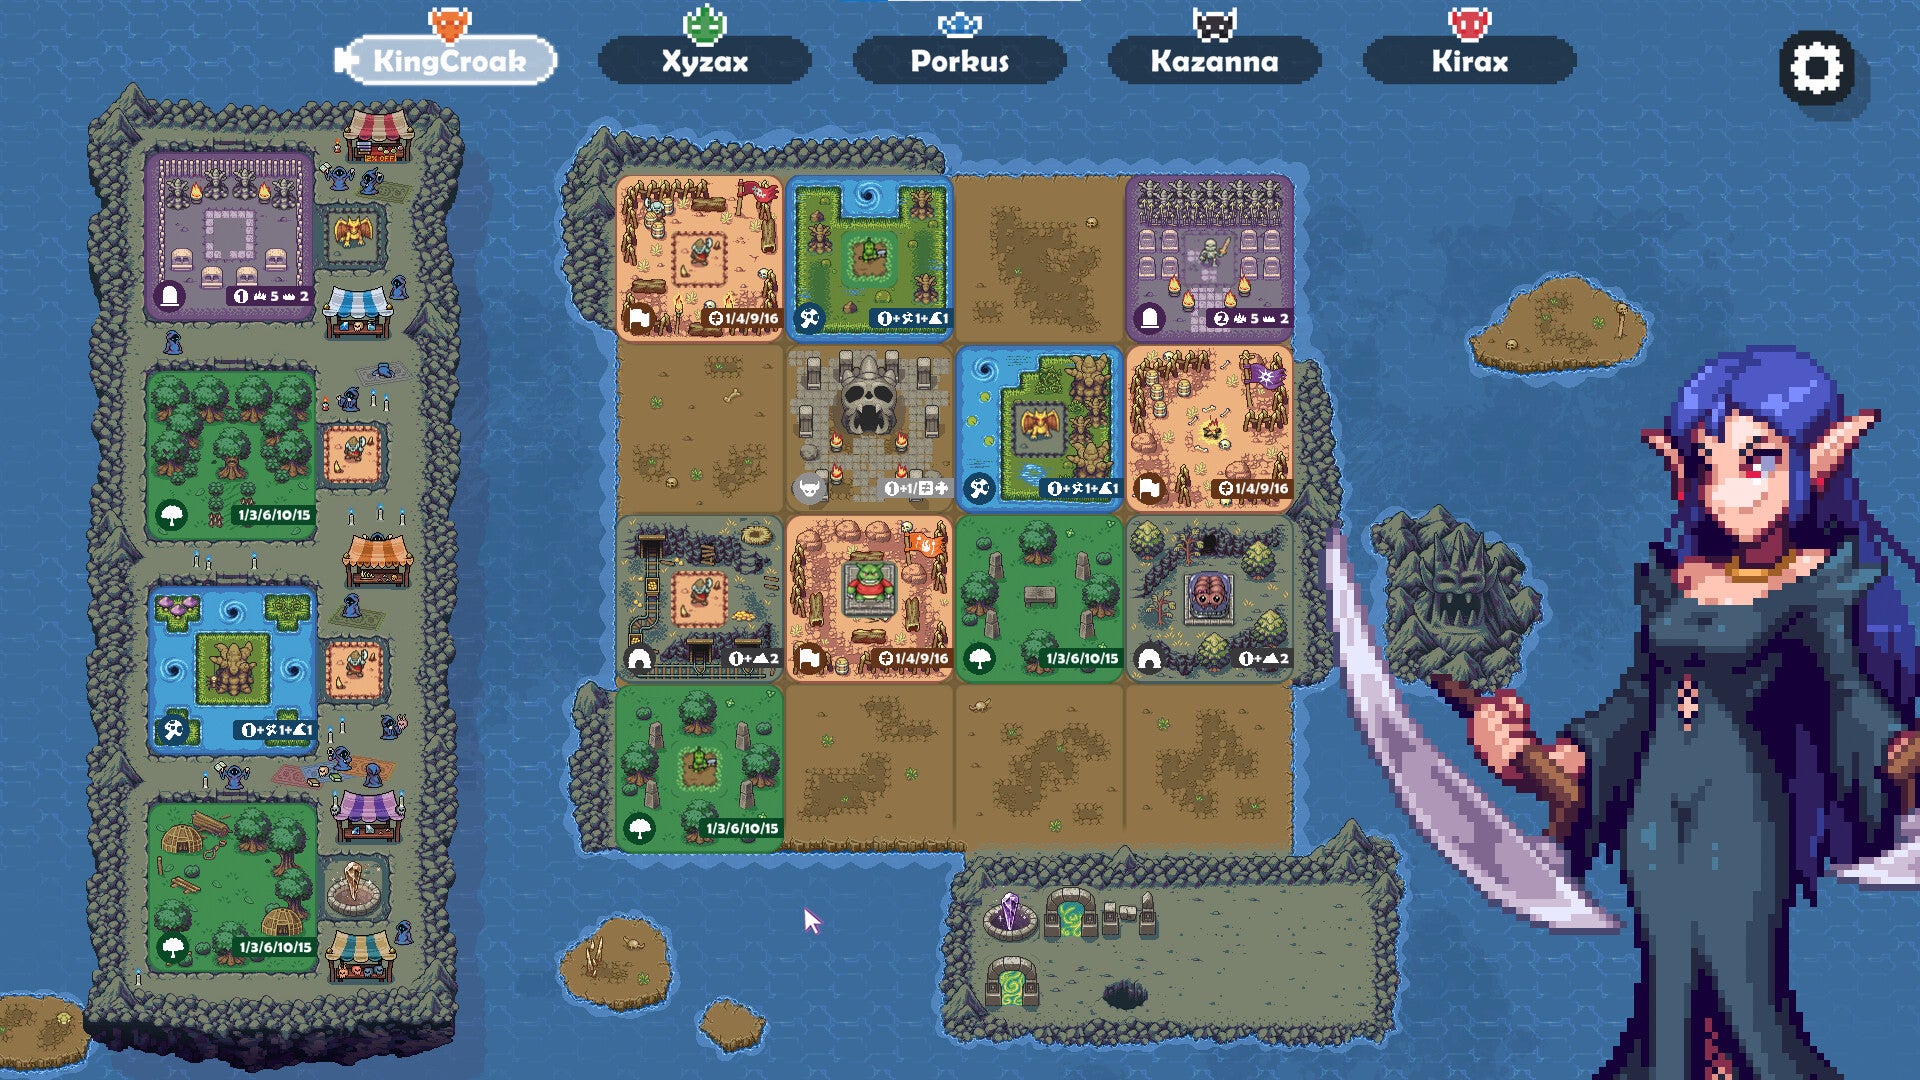 A screenshot for Overboss Digital video game depicting gameplay.